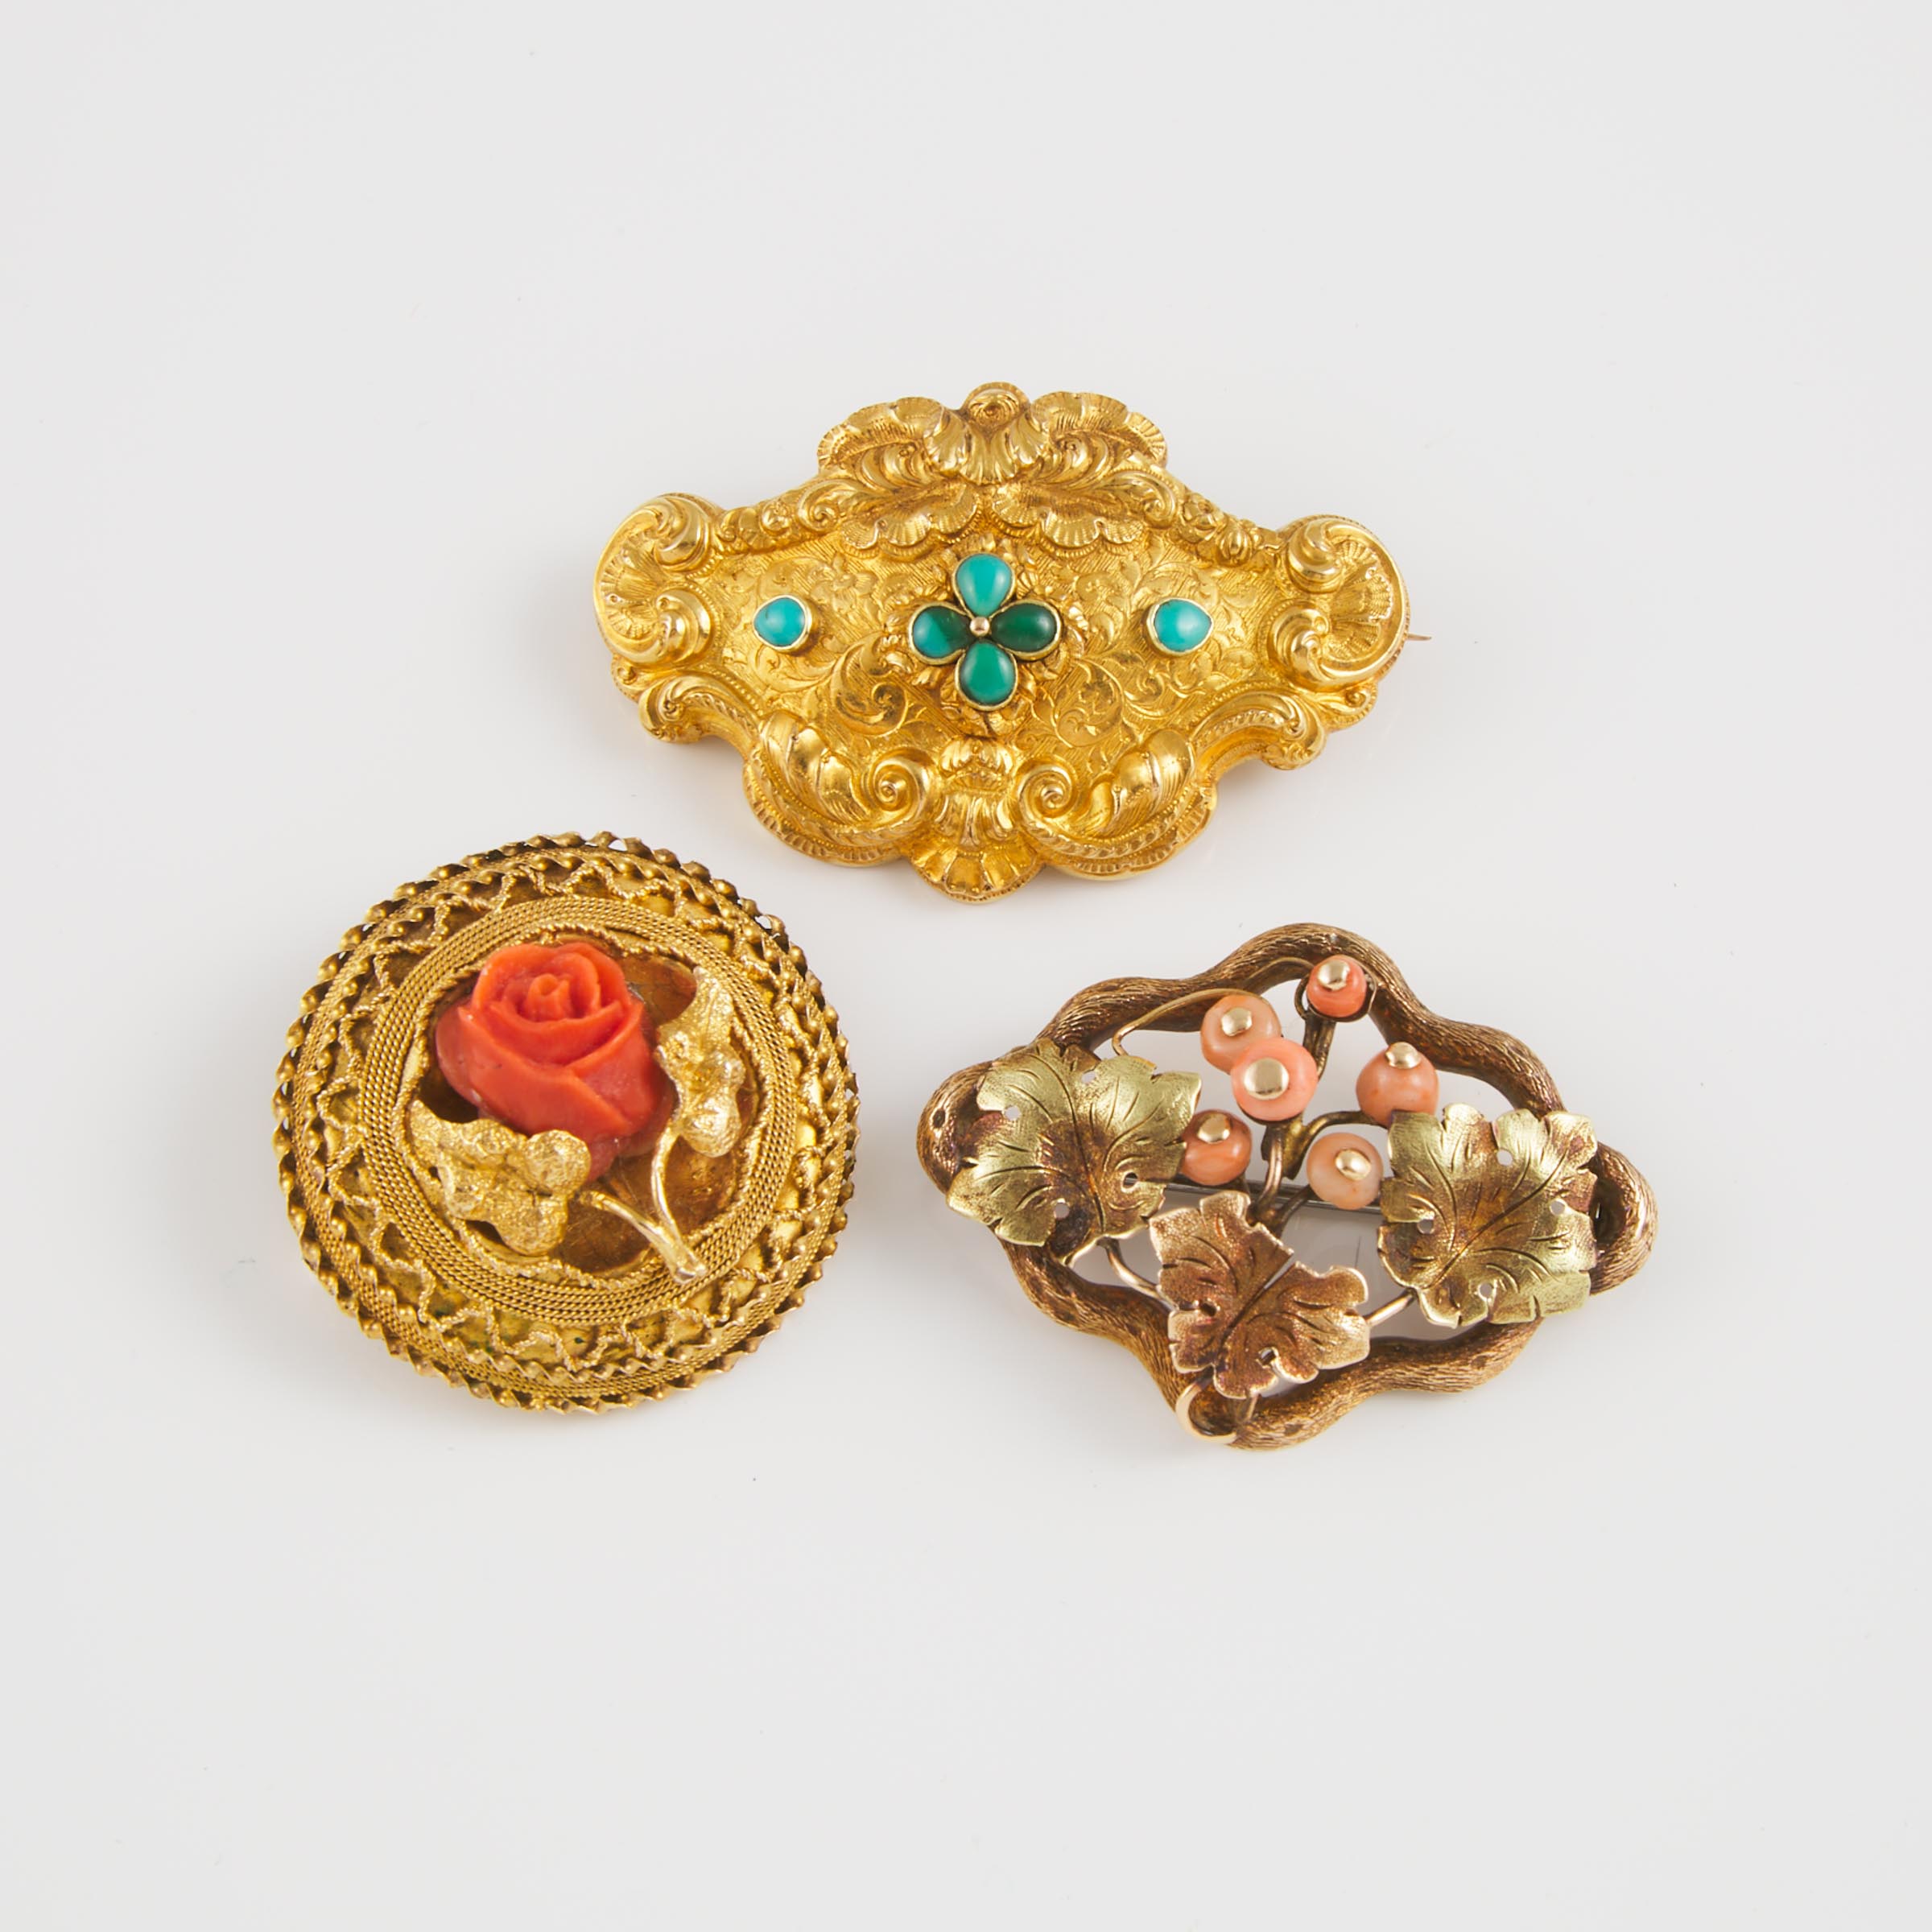 3 x 19th Century 14k Gold Brooches